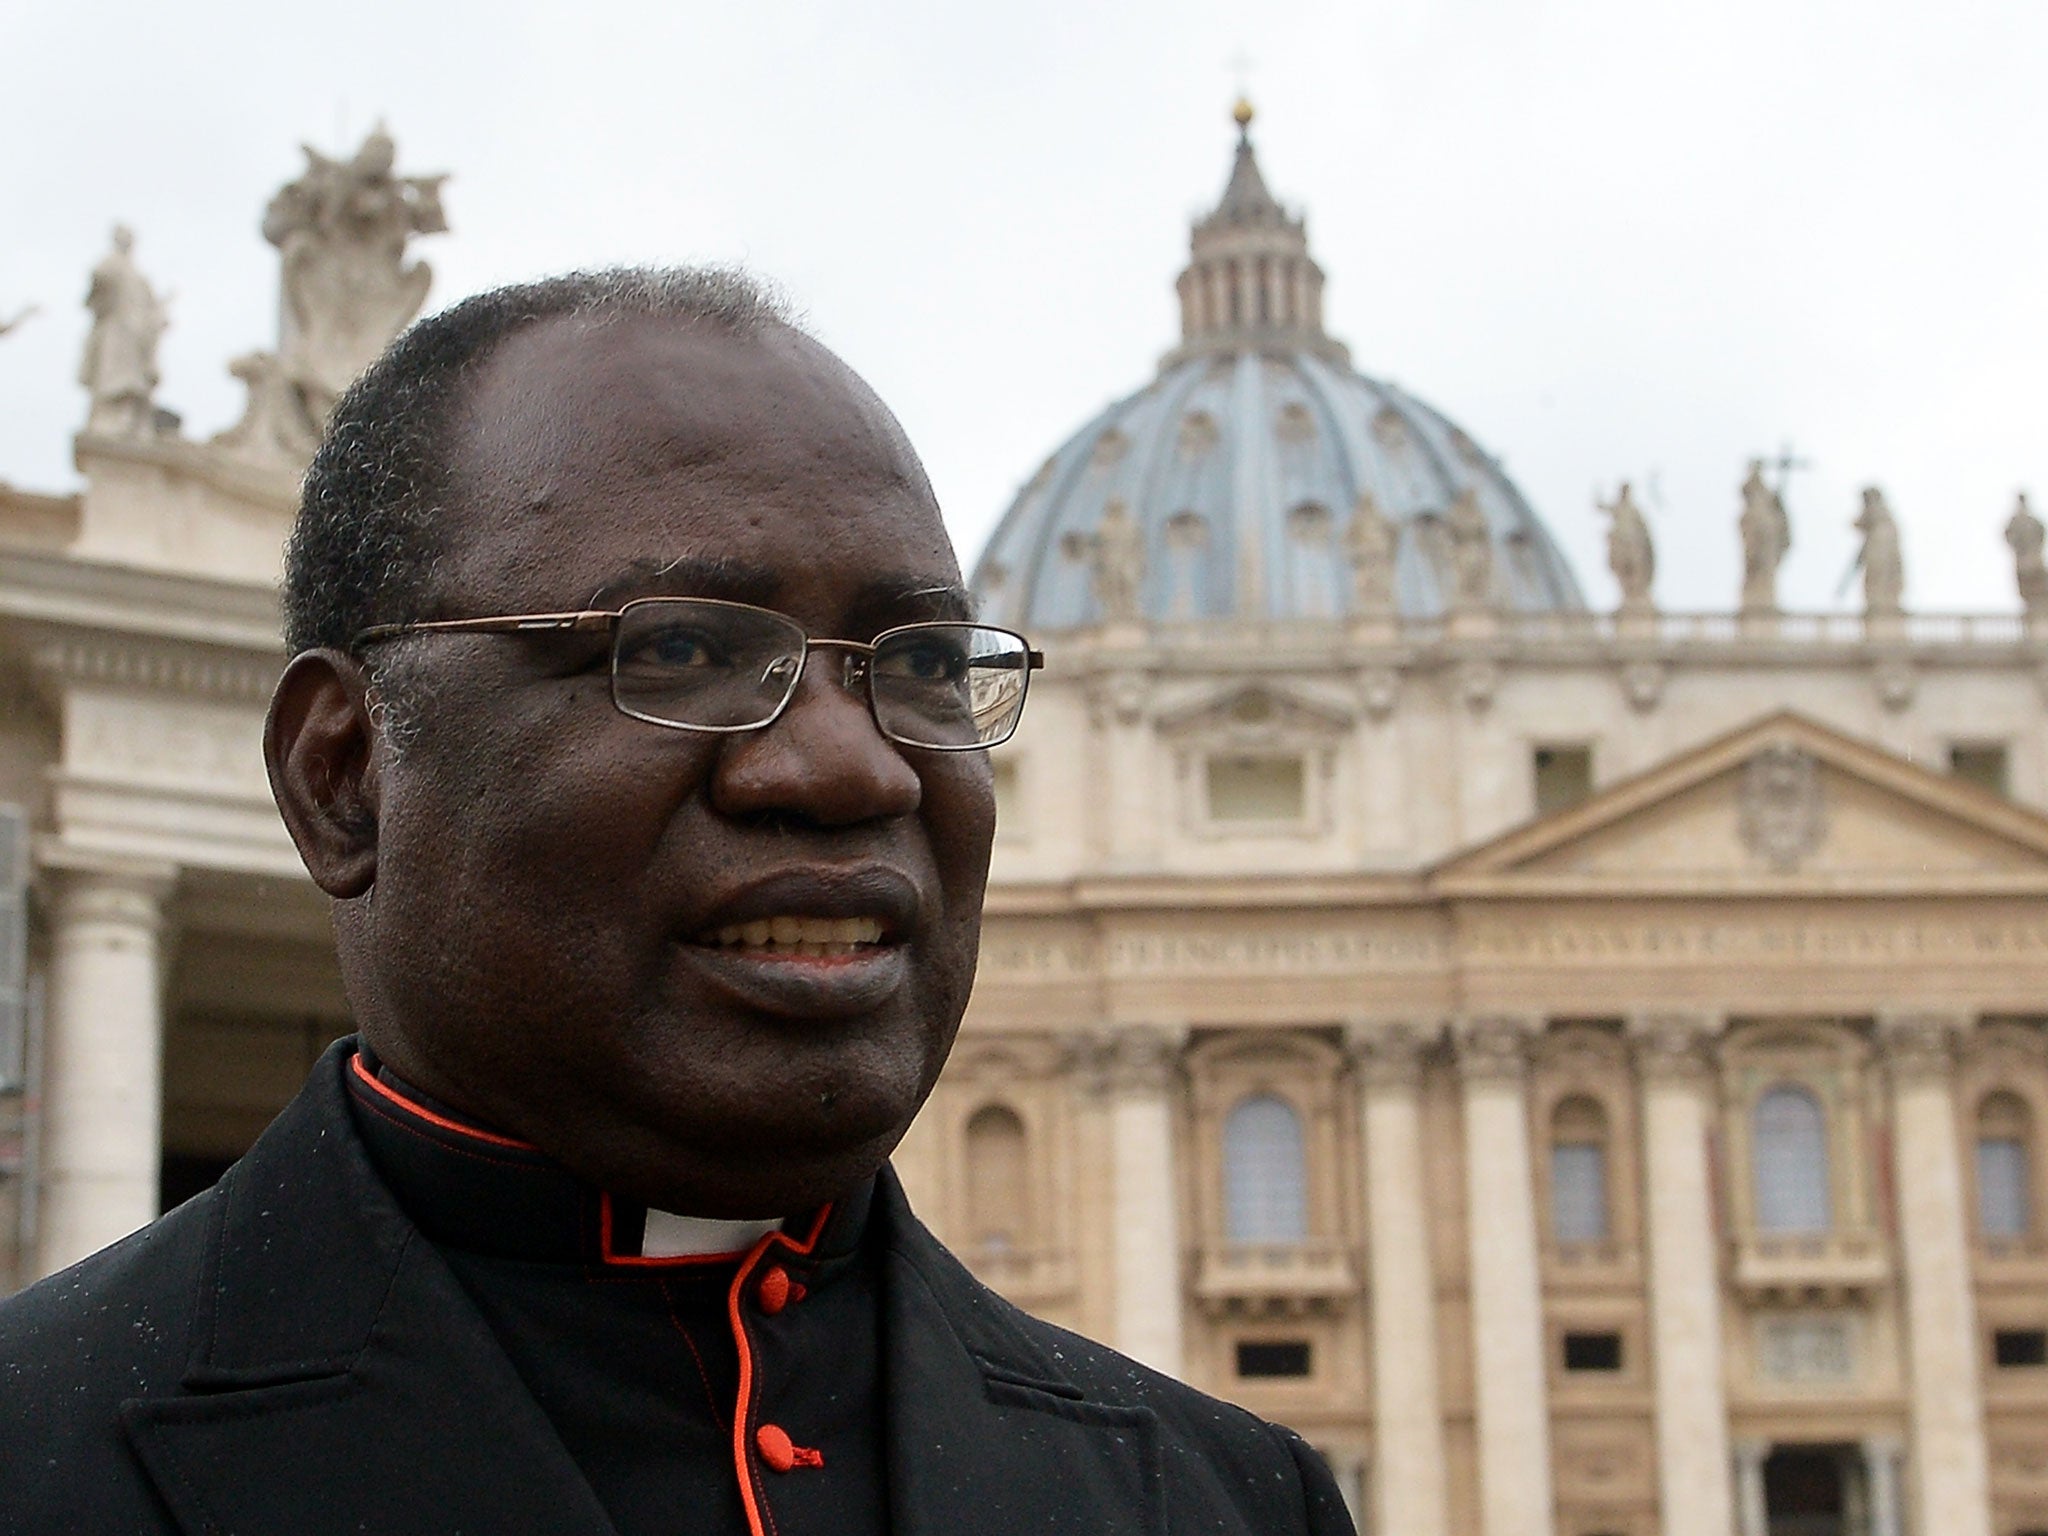 Kenyan cardinal John Njue pictured on St Peter's square in the Vatican.